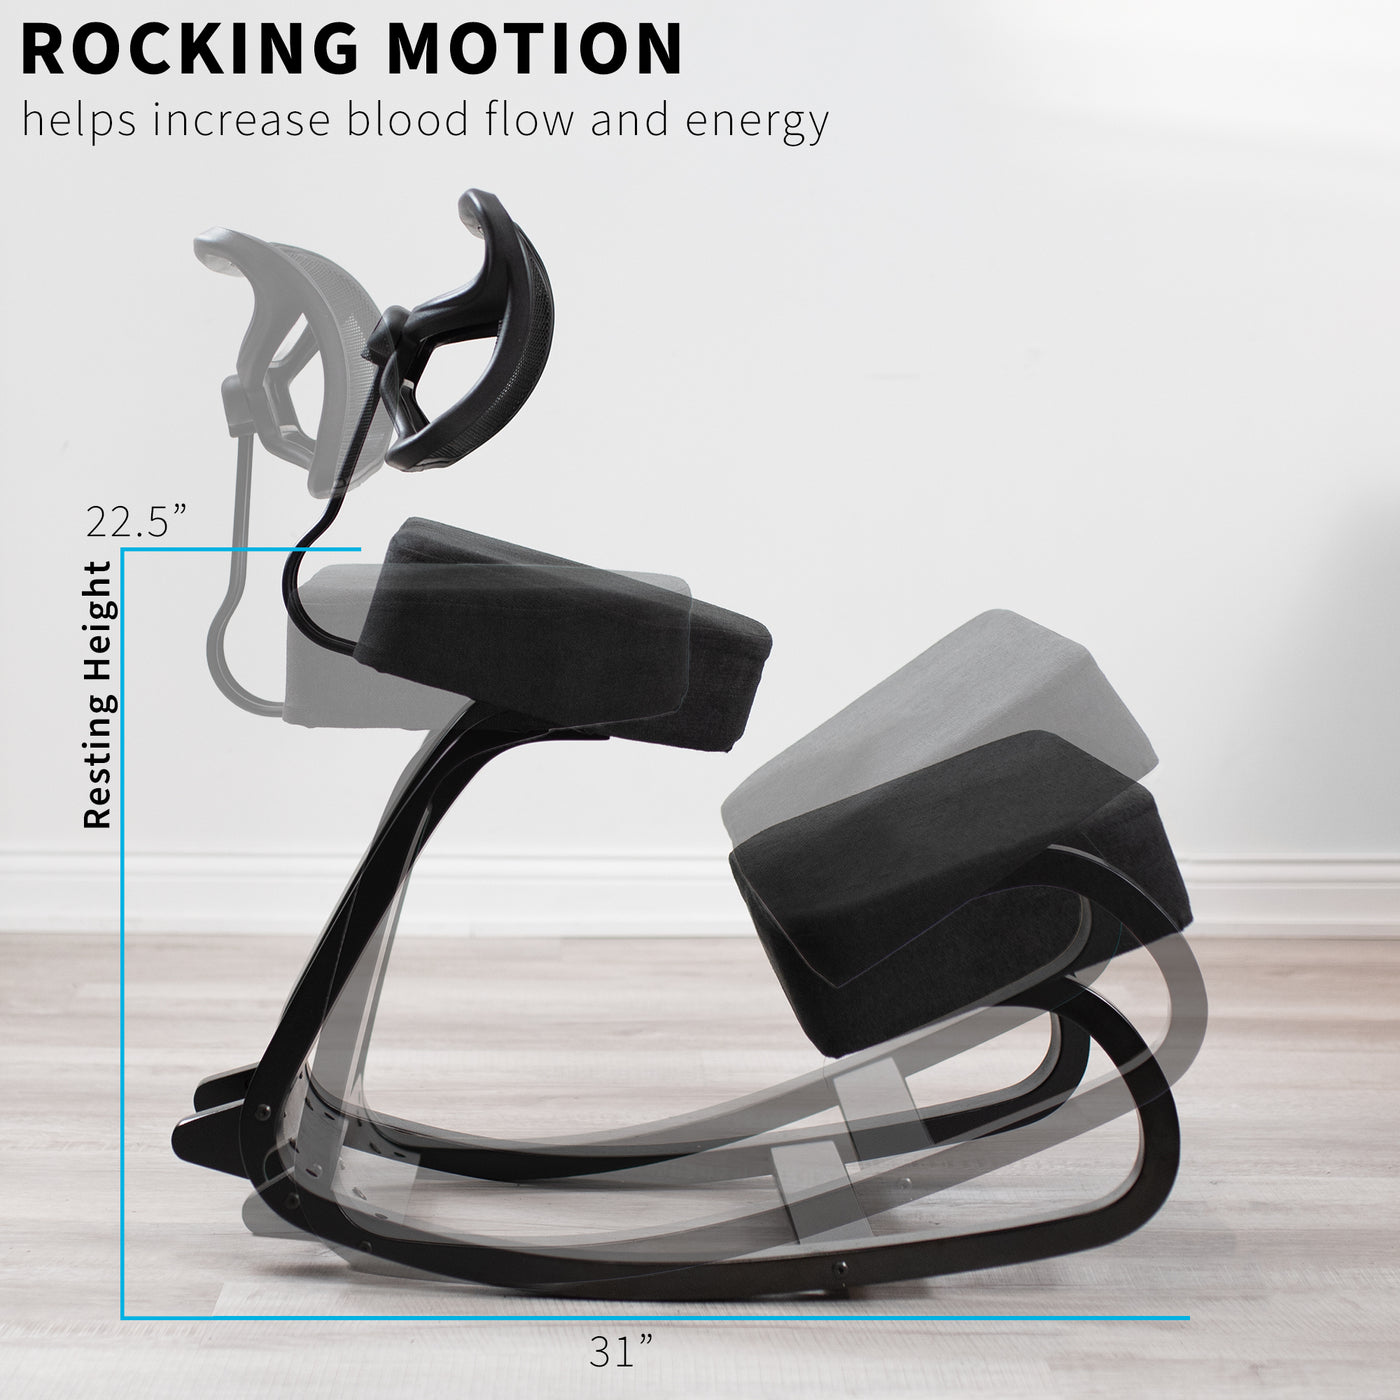  Increase concentration while working with the rocking feature of the chair.